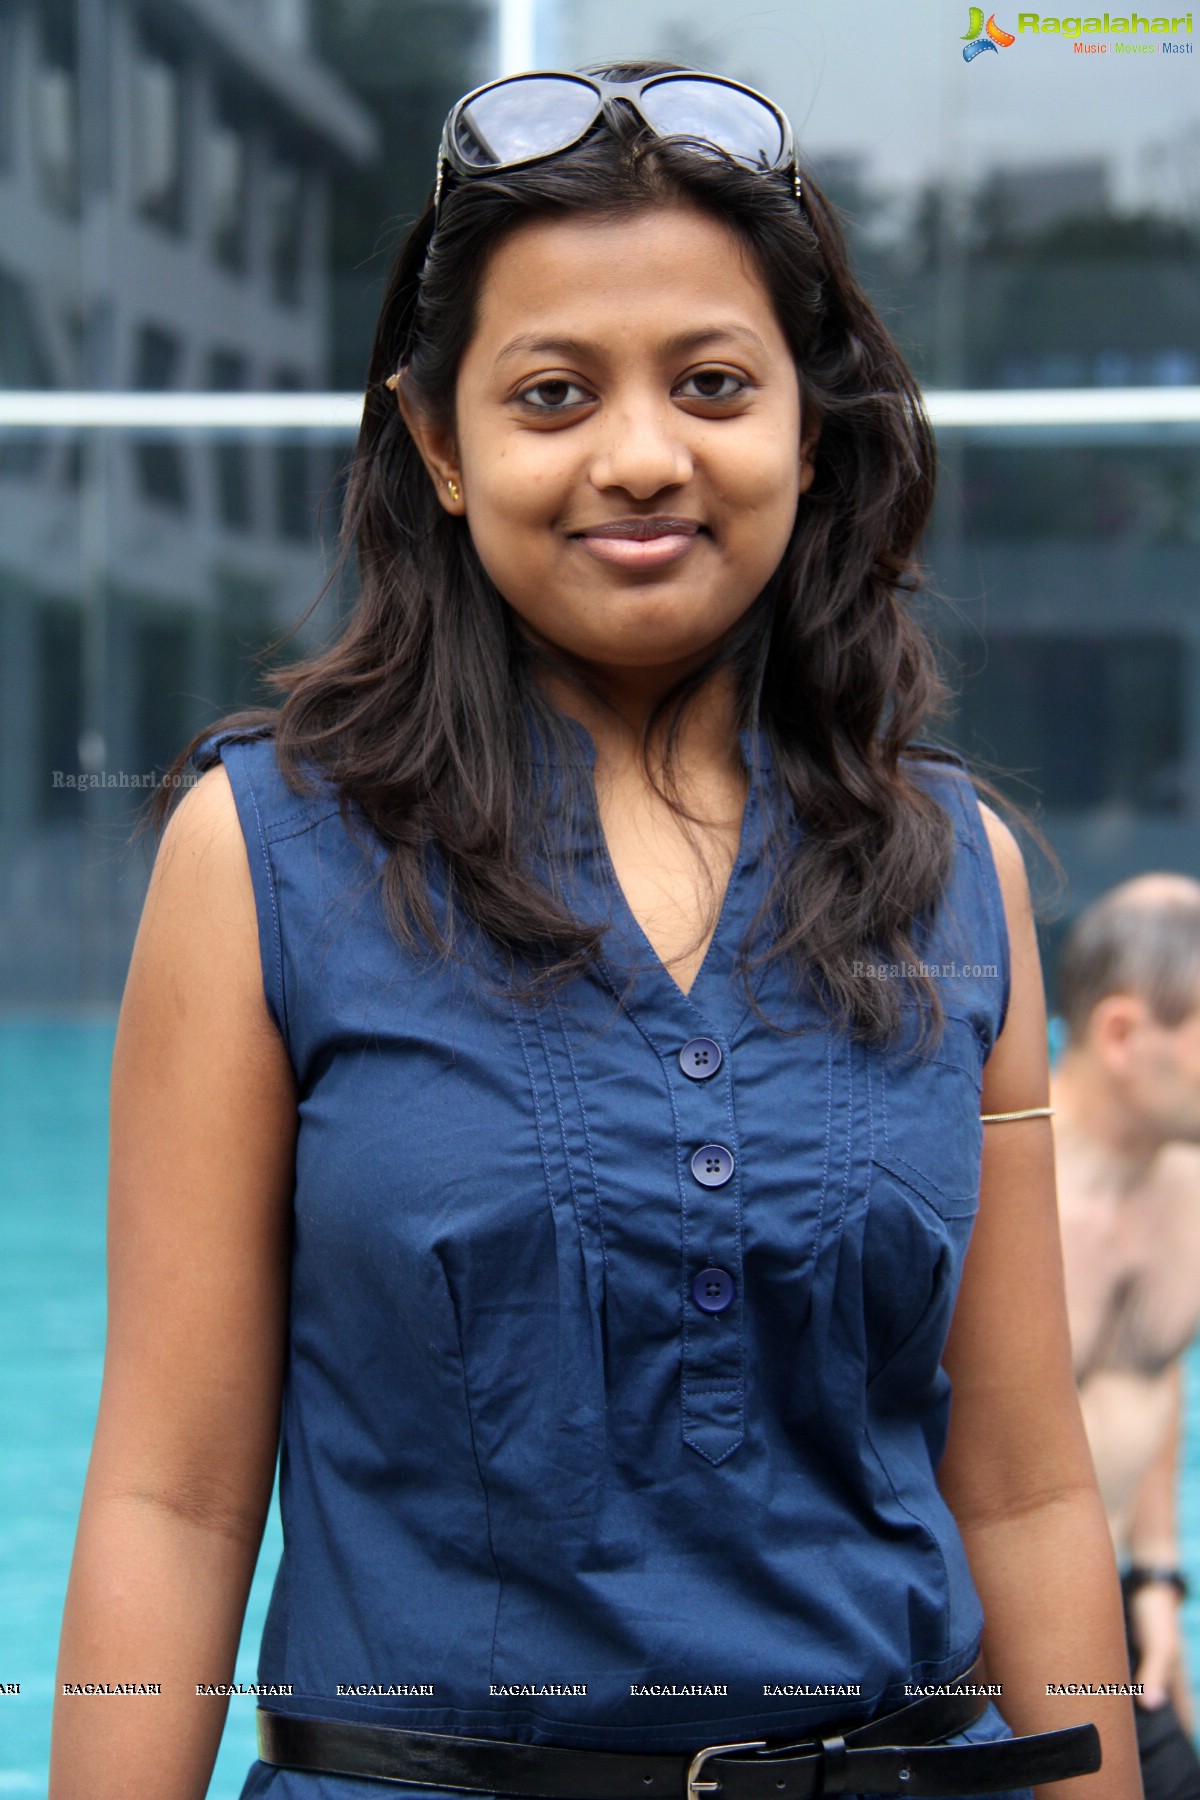 Sundown Pool Party (May 3, 2014) The Park, Hyderabad